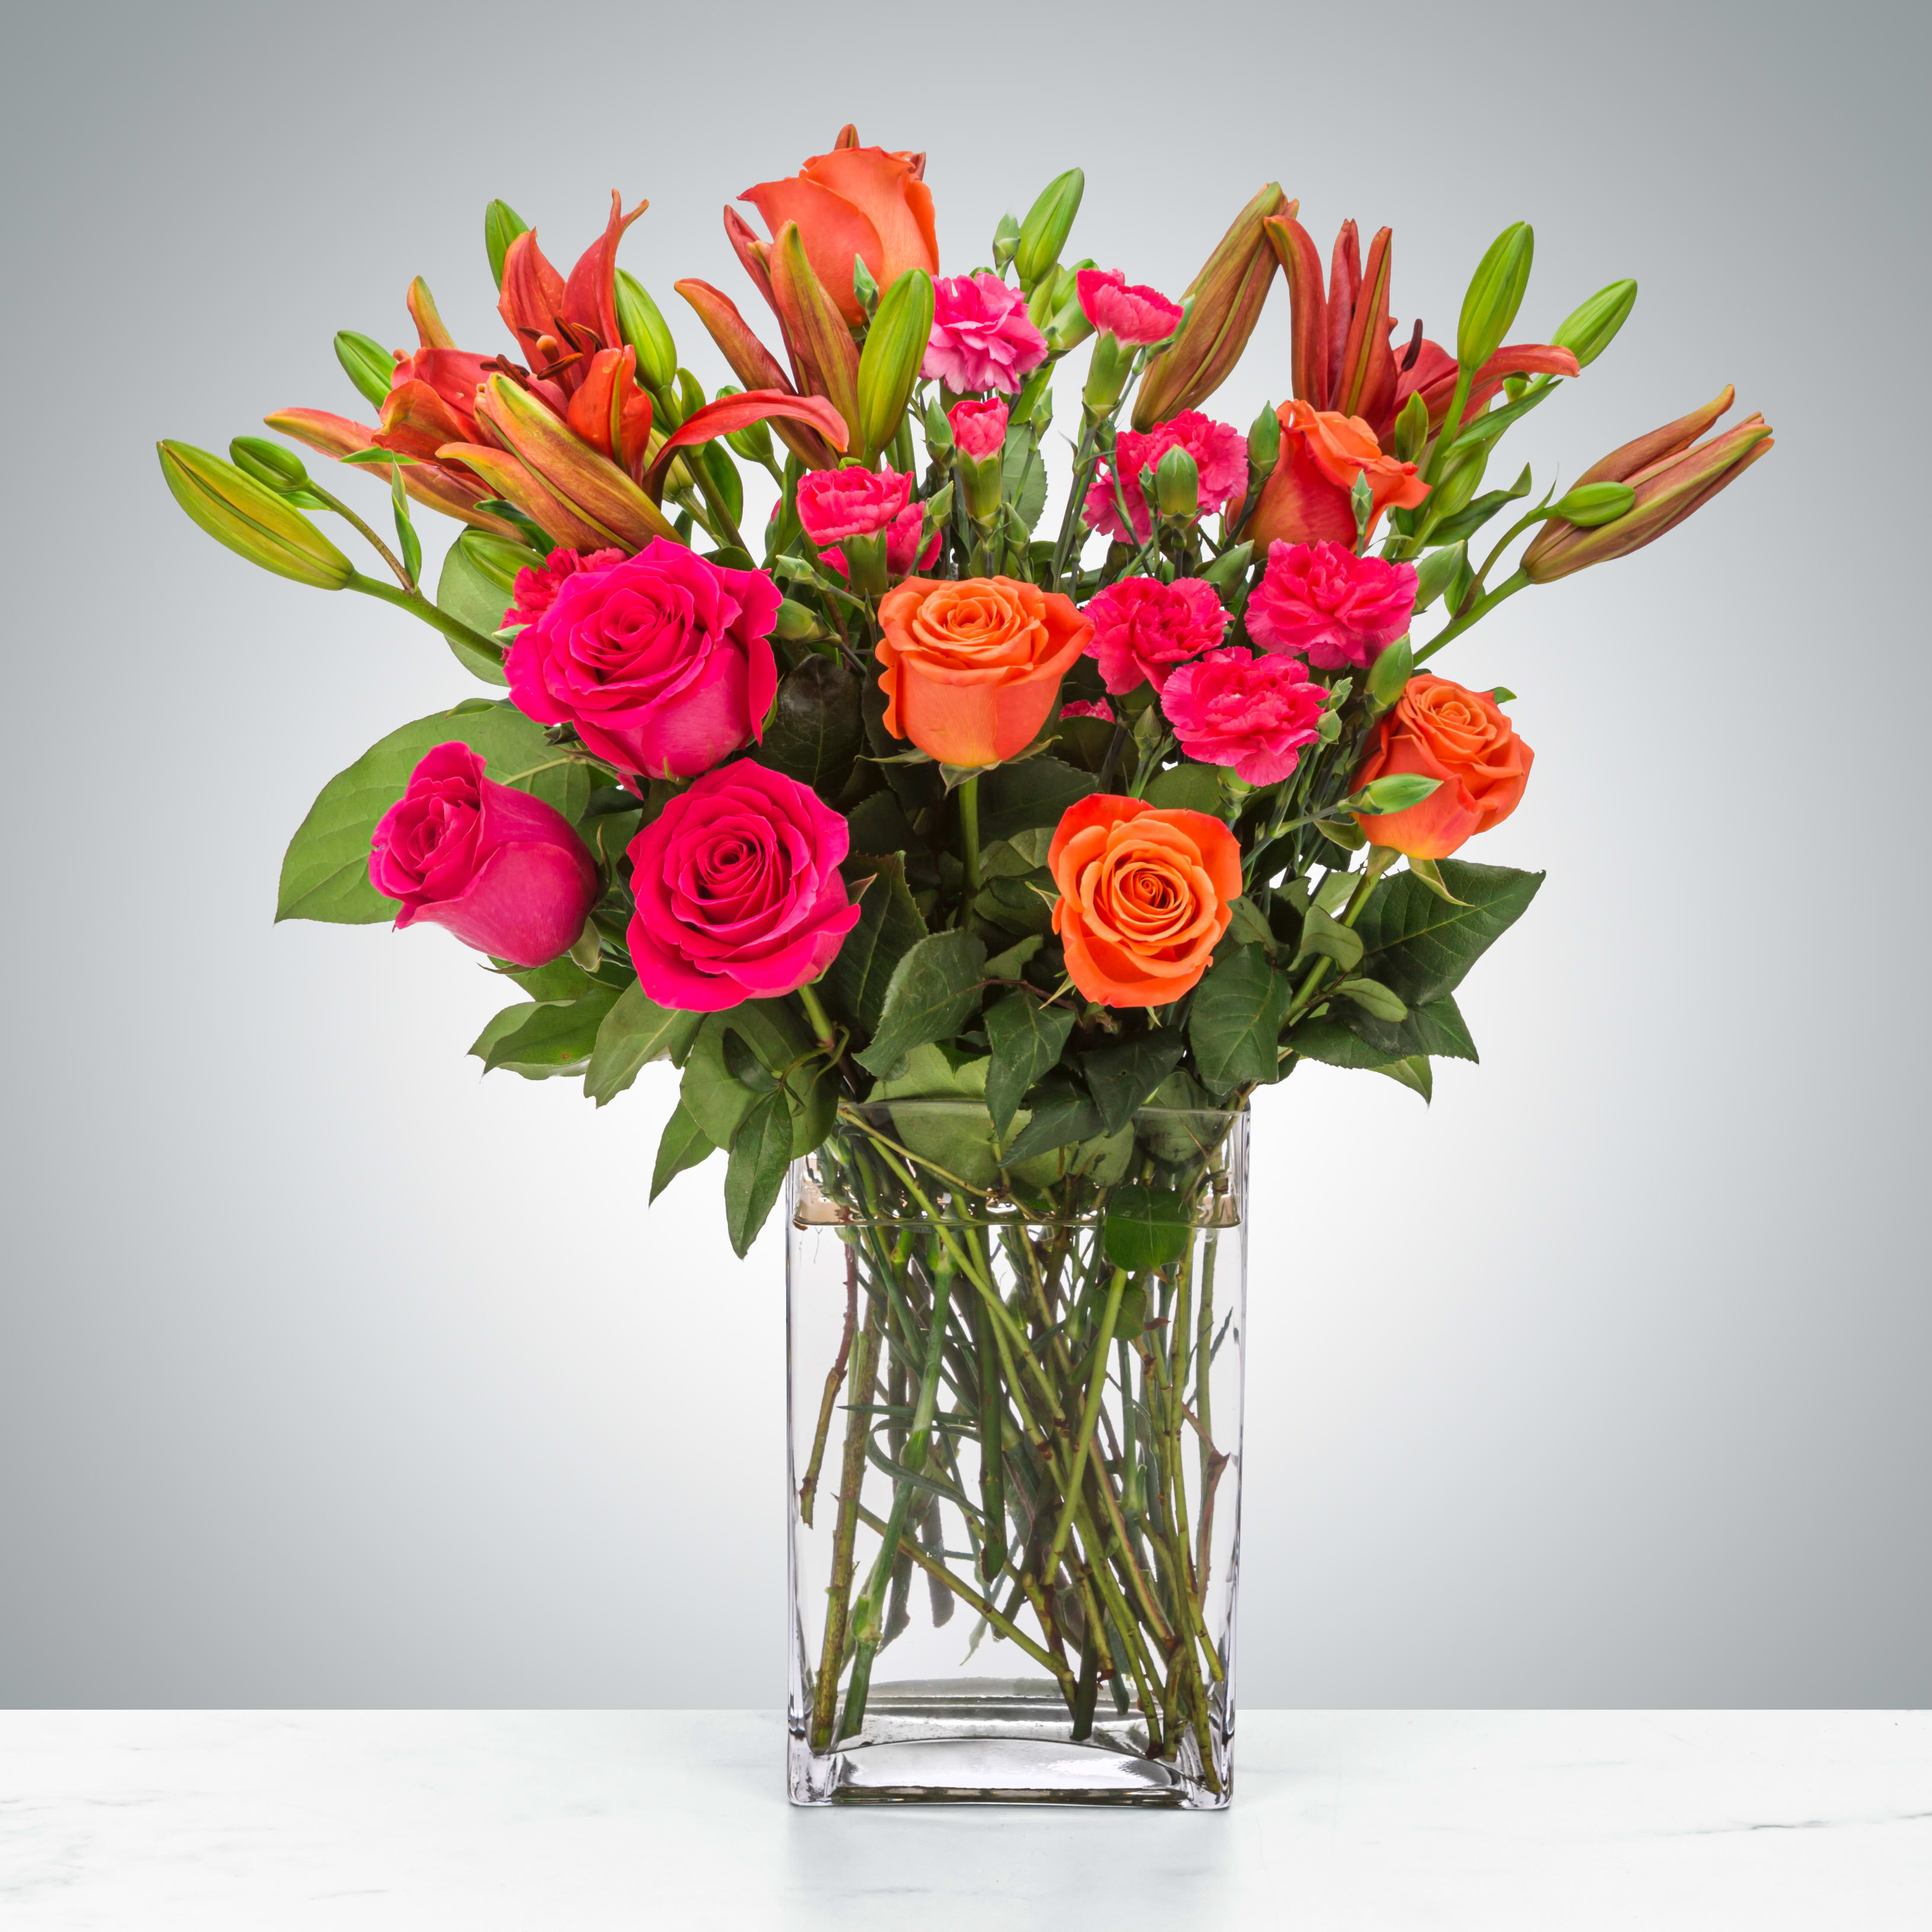 Boss Babe - This arrangement is electric! Send this bright orange and hot pink rose arrangement to make a big impression.  Approximate Dimensions: 20&quot;D x 20&quot;H